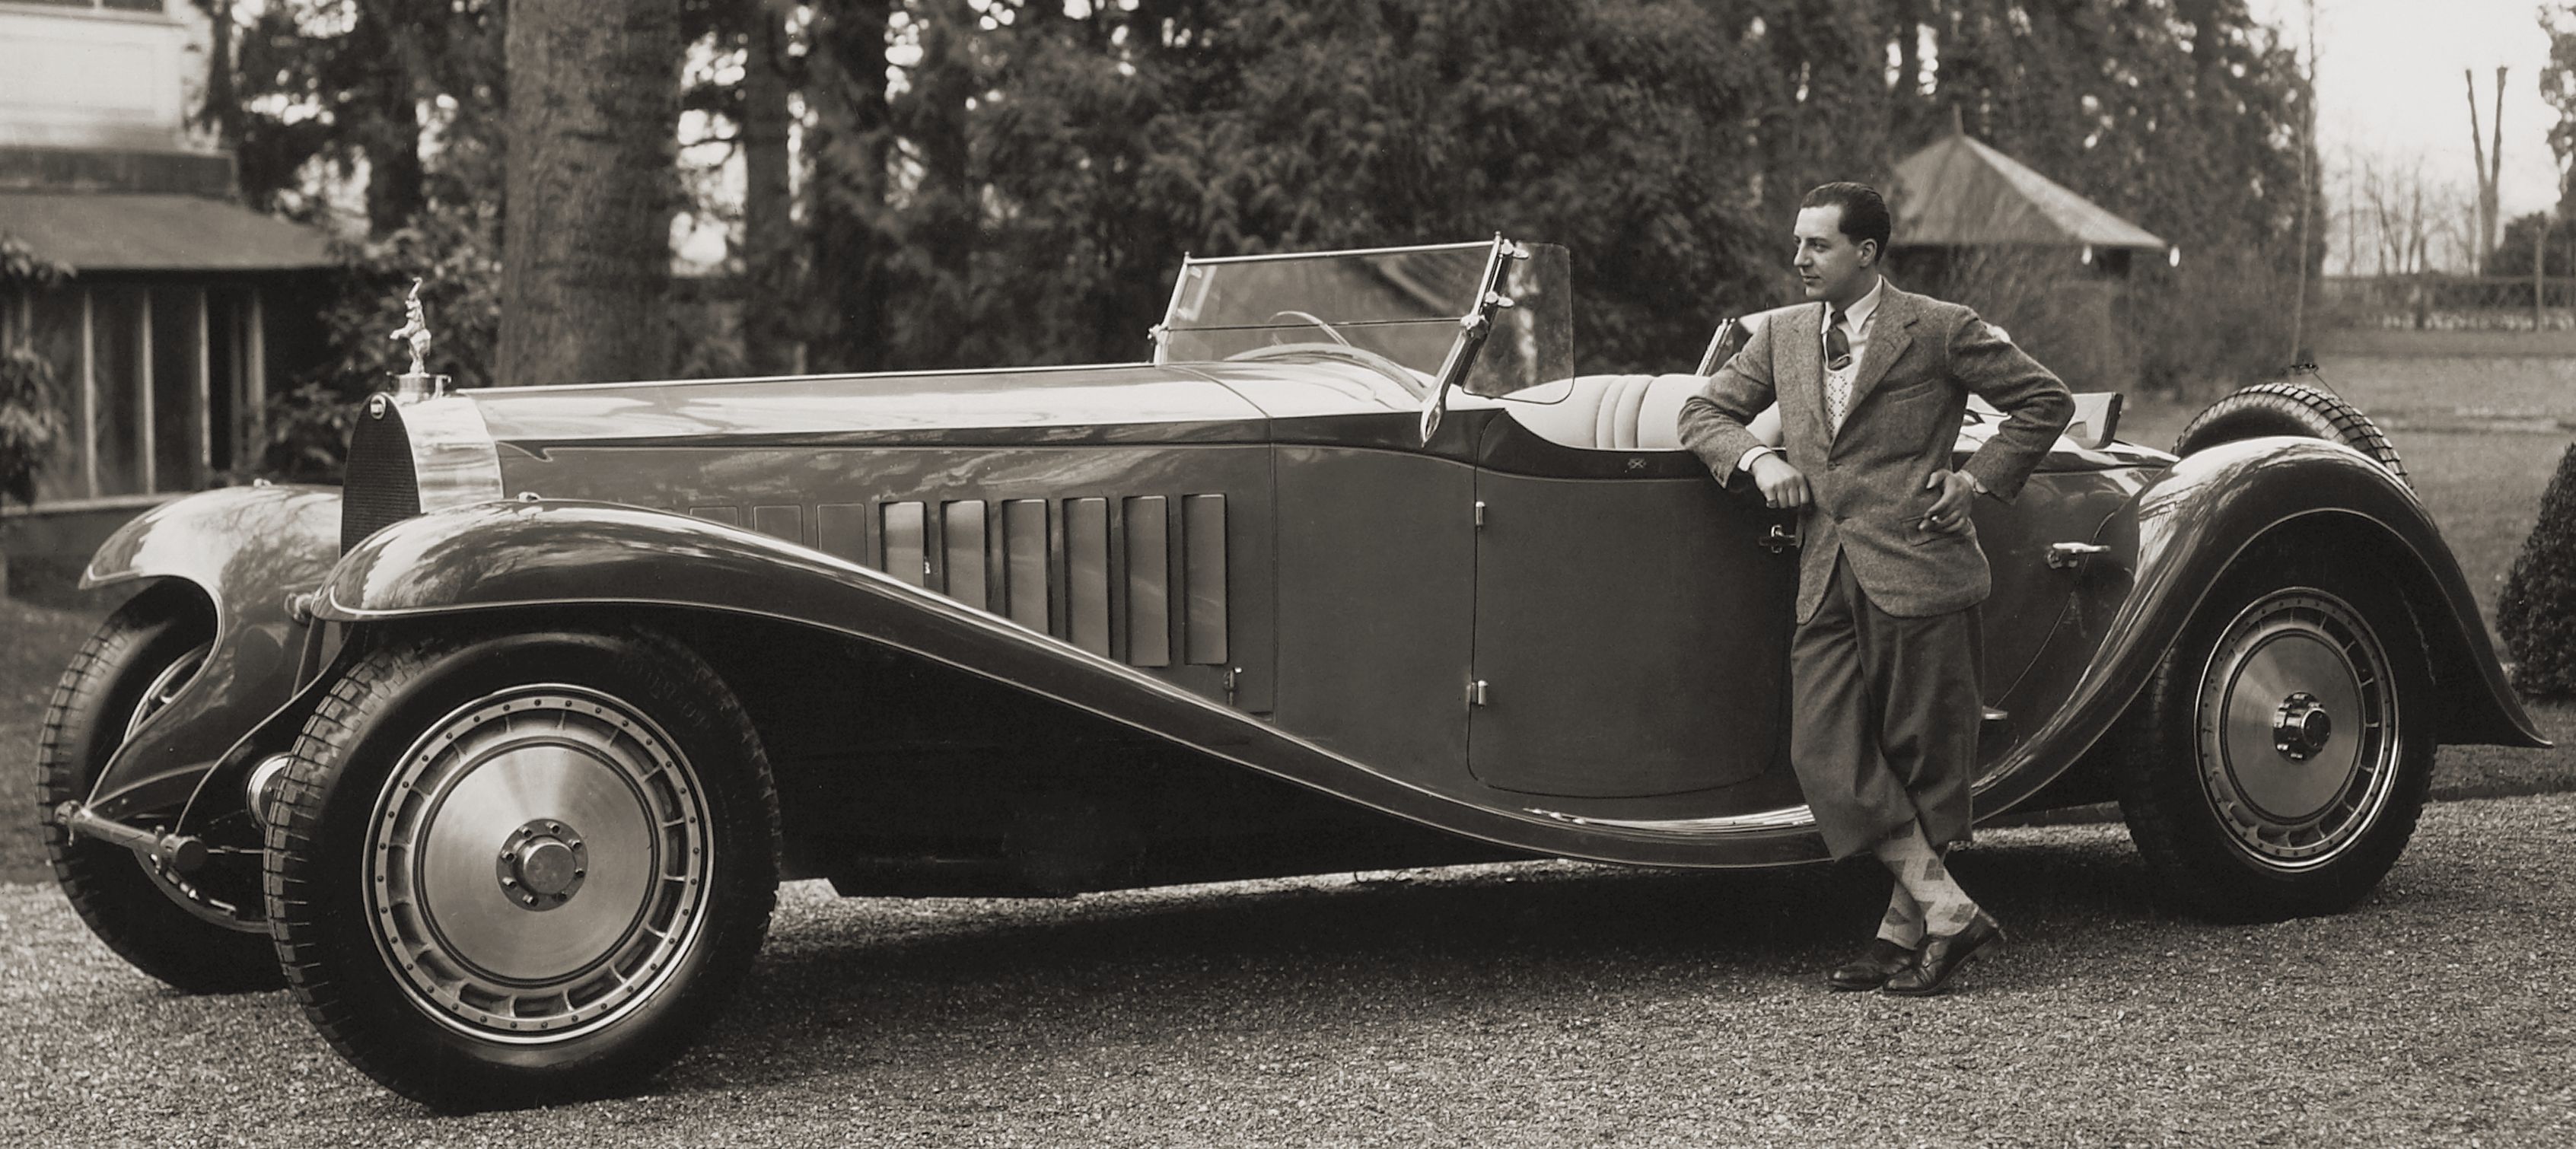 Bugatti Type 41 Royale by Armand Esders